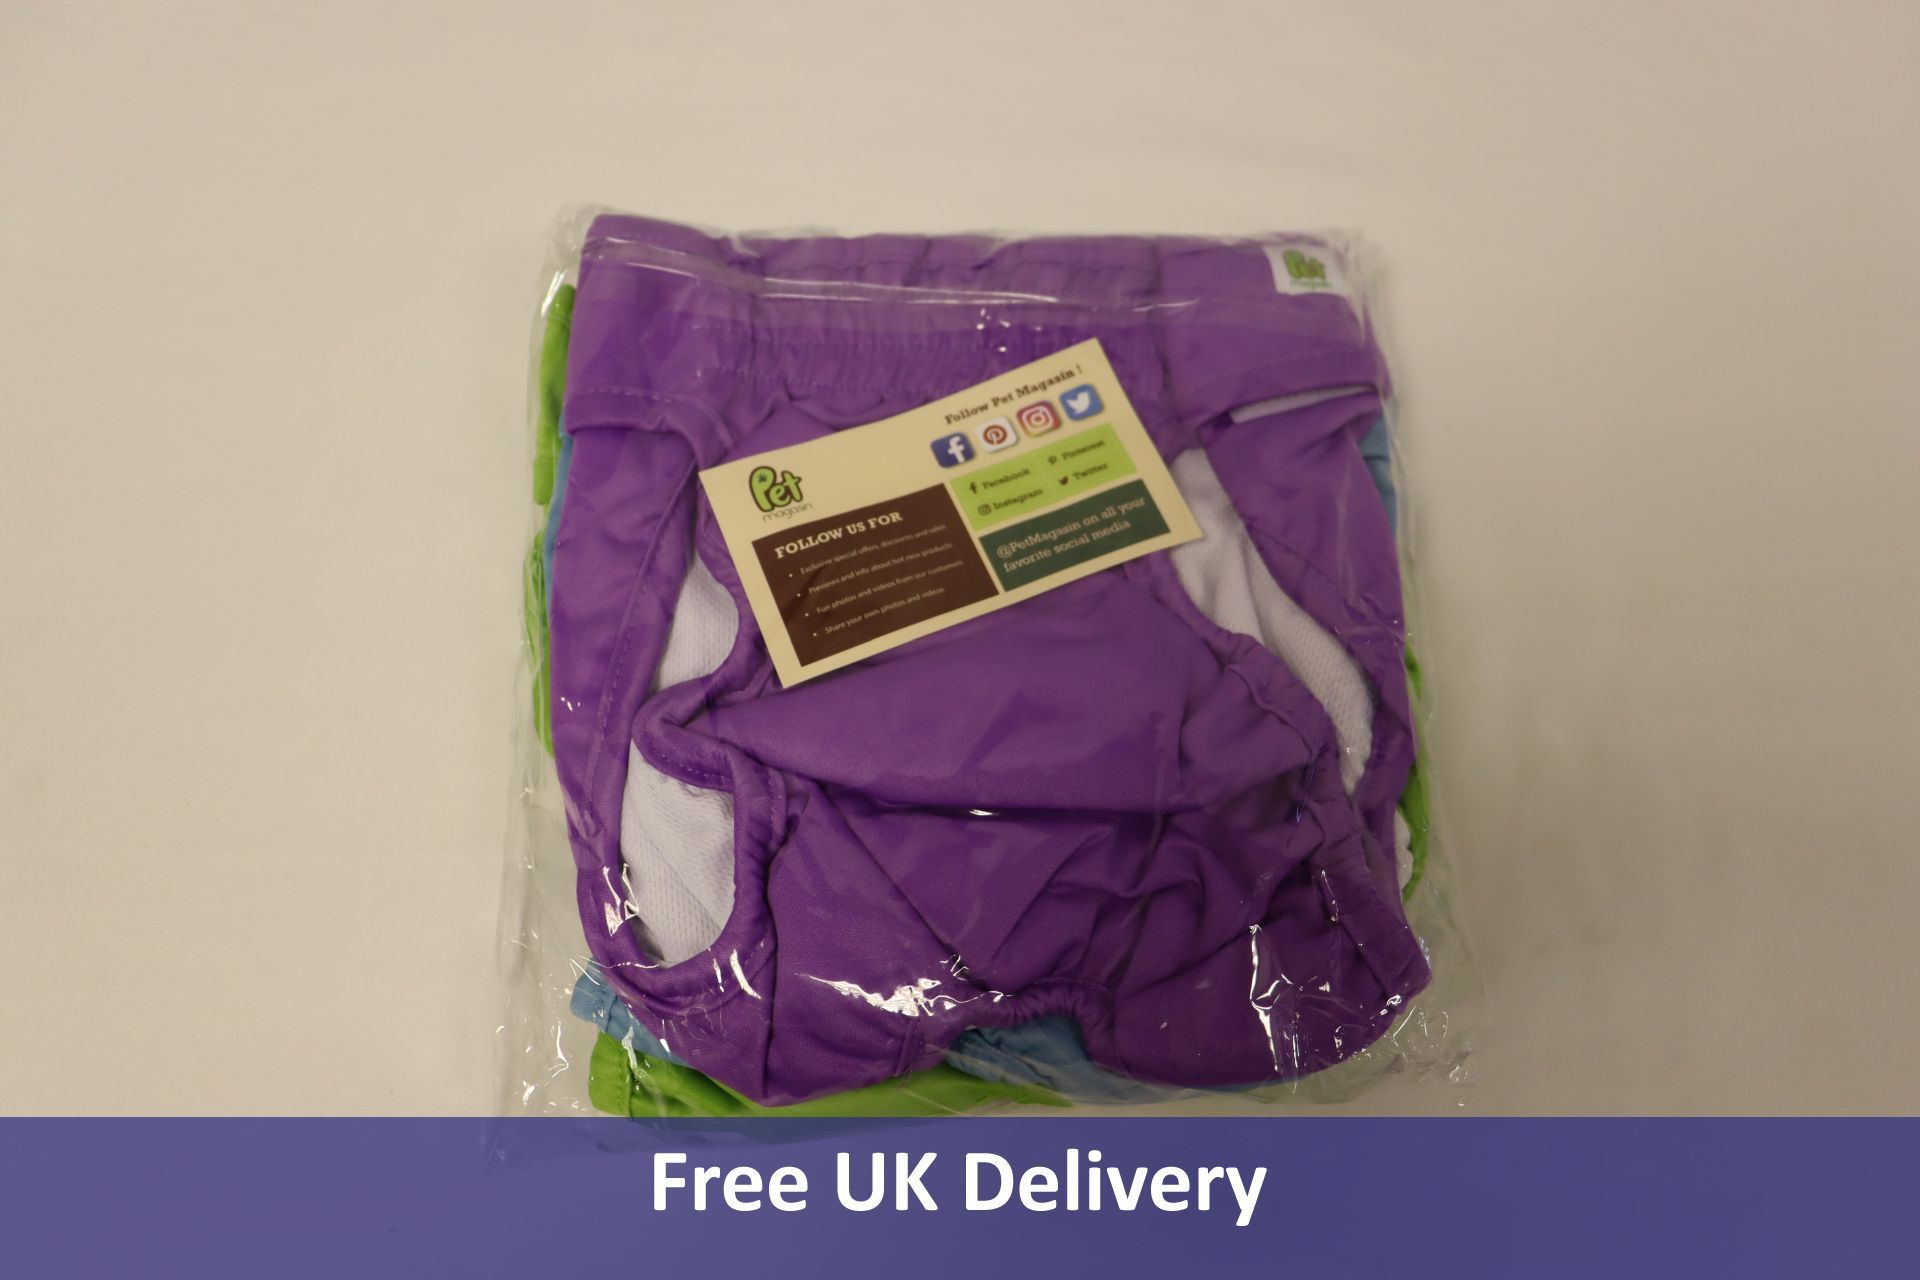 Three Magasin Durable Washable Large Dog Diaper 3 packs to include 1x Green, 1x Blue, 1x Purple